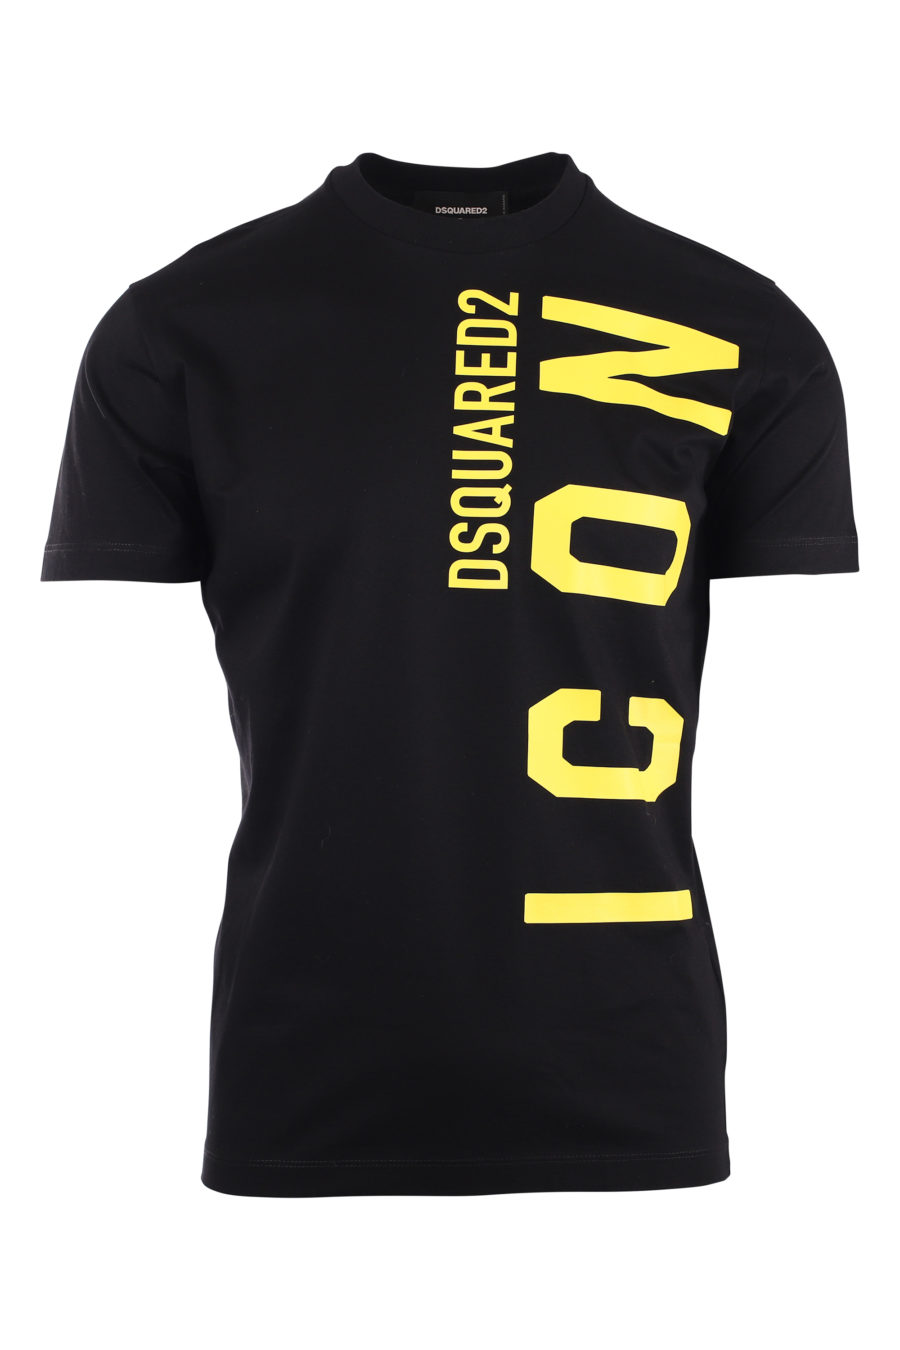 Black T-shirt with yellow vertical "icon" logo - IMG 9719